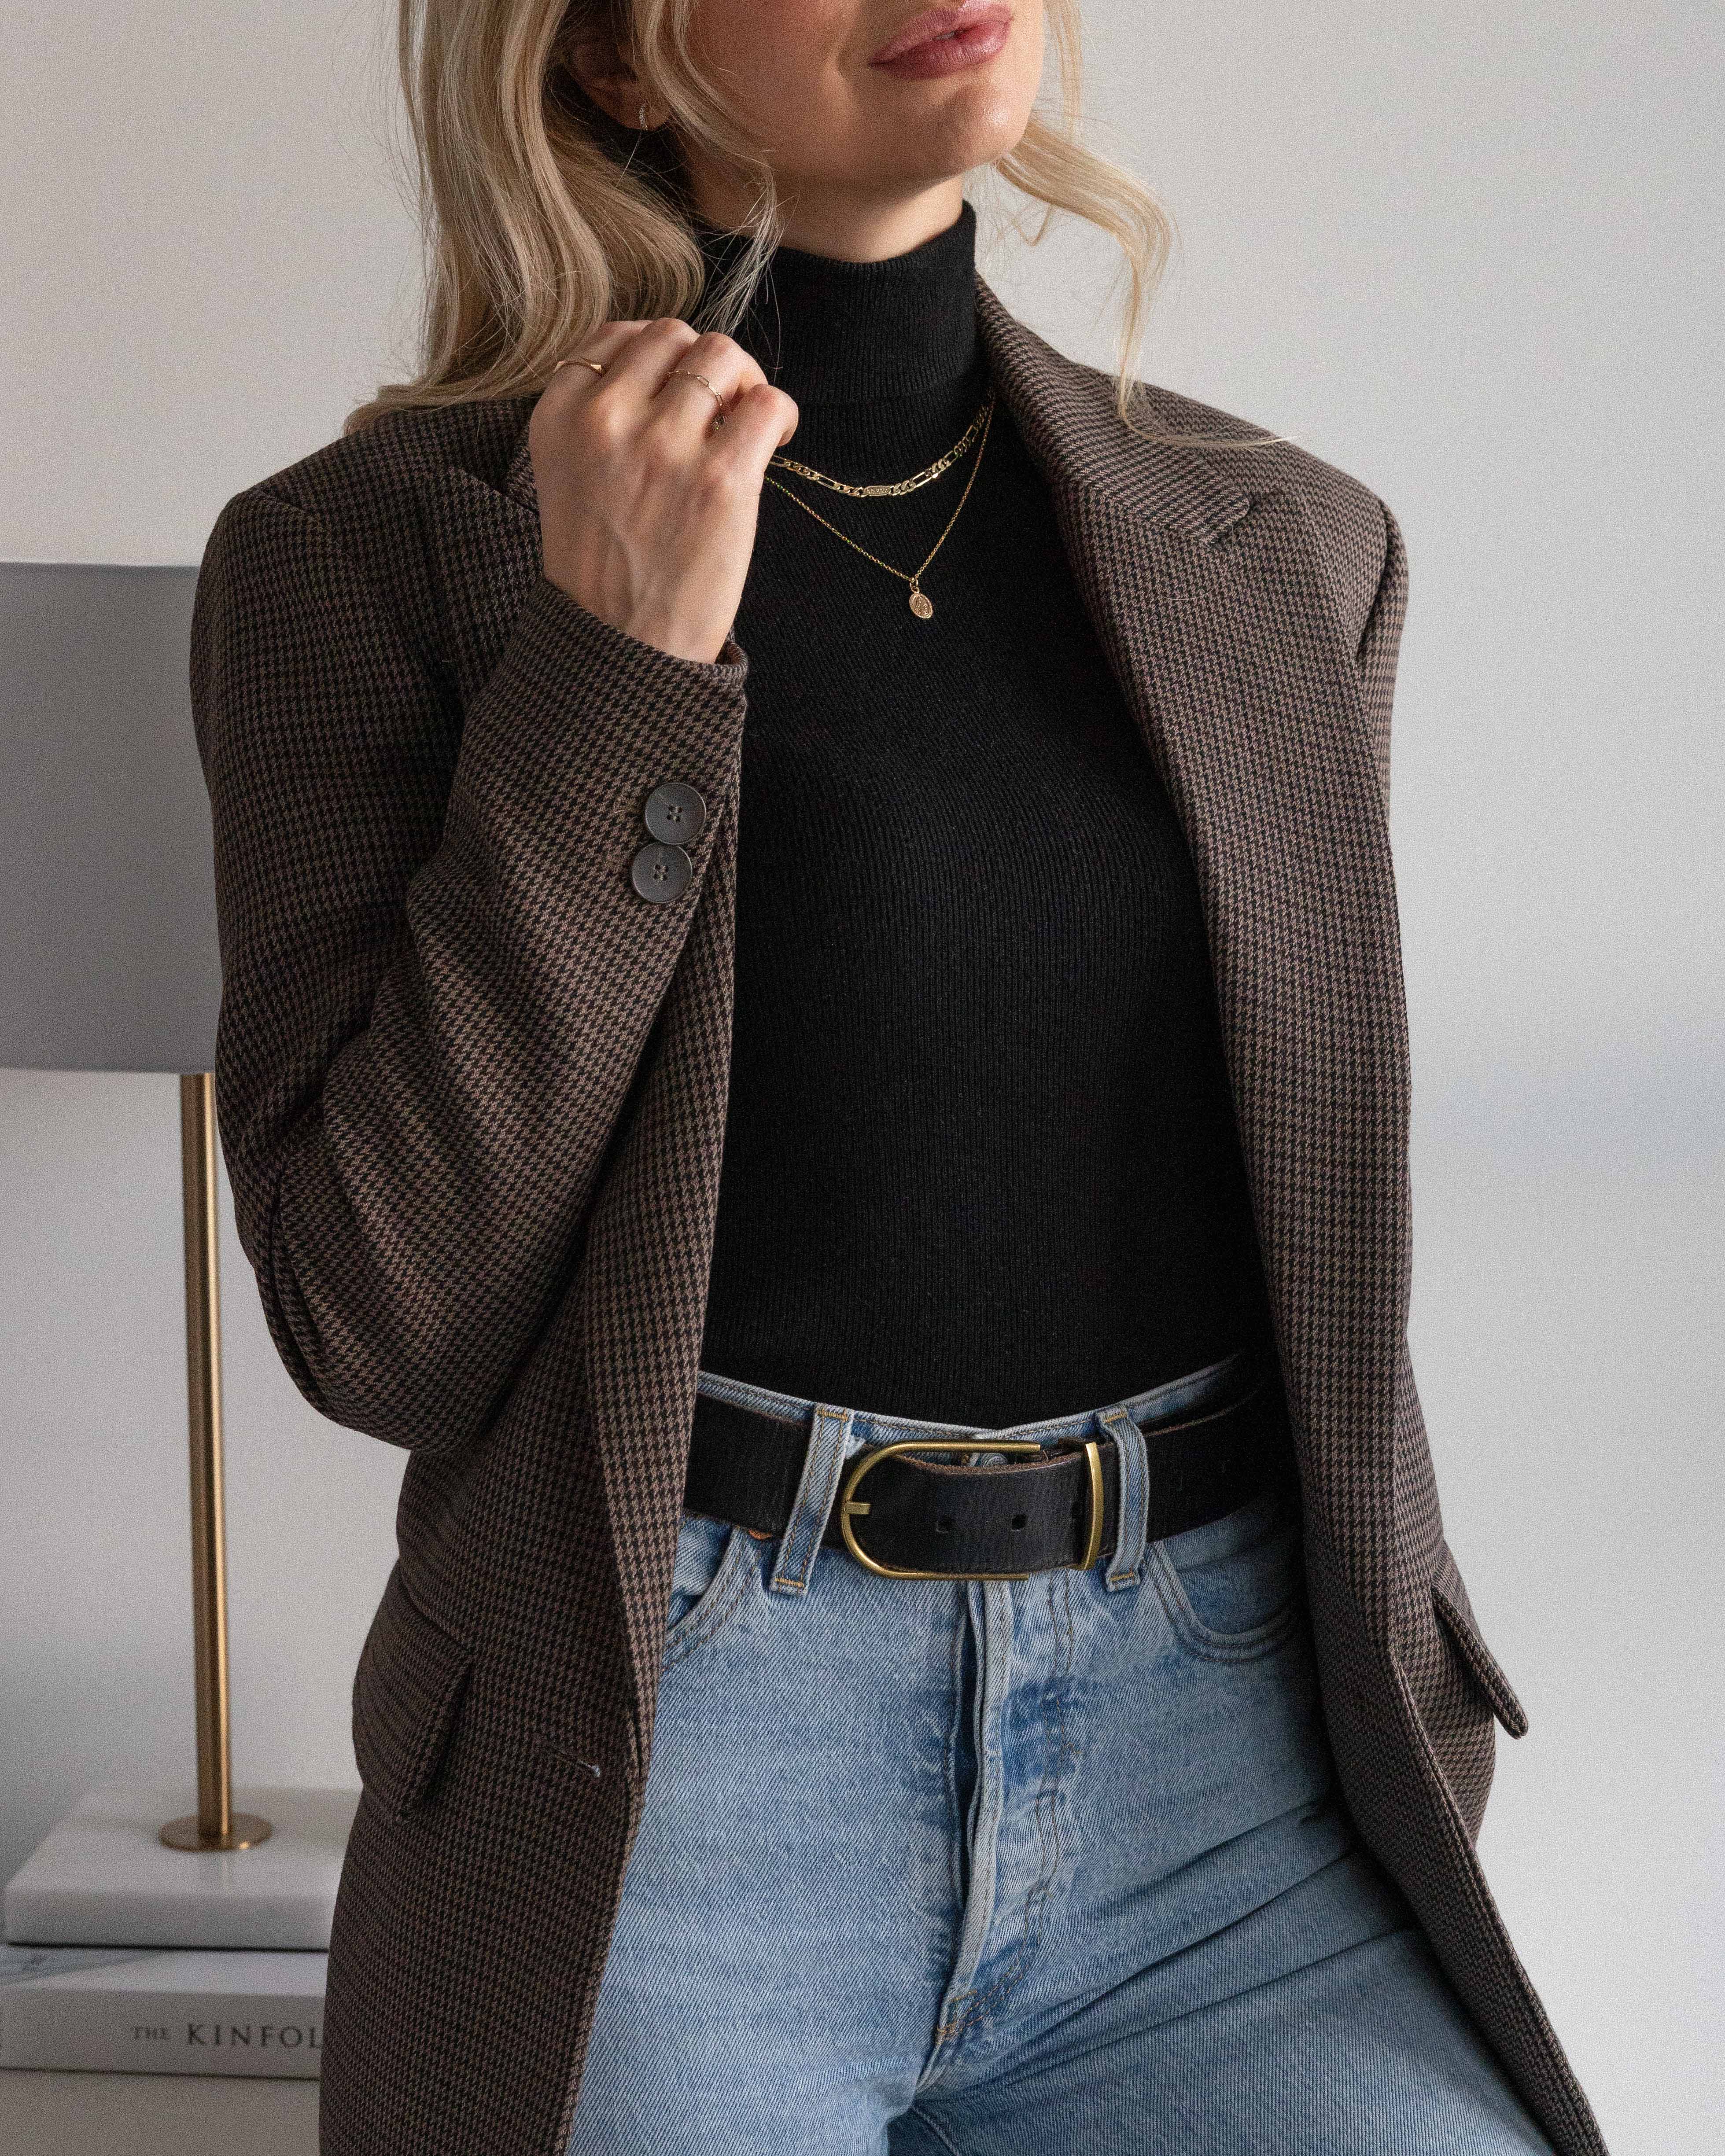 5 TRENDY FALL OUTFIT IDEAS 2020 ❤️🍂 - Alex Gaboury